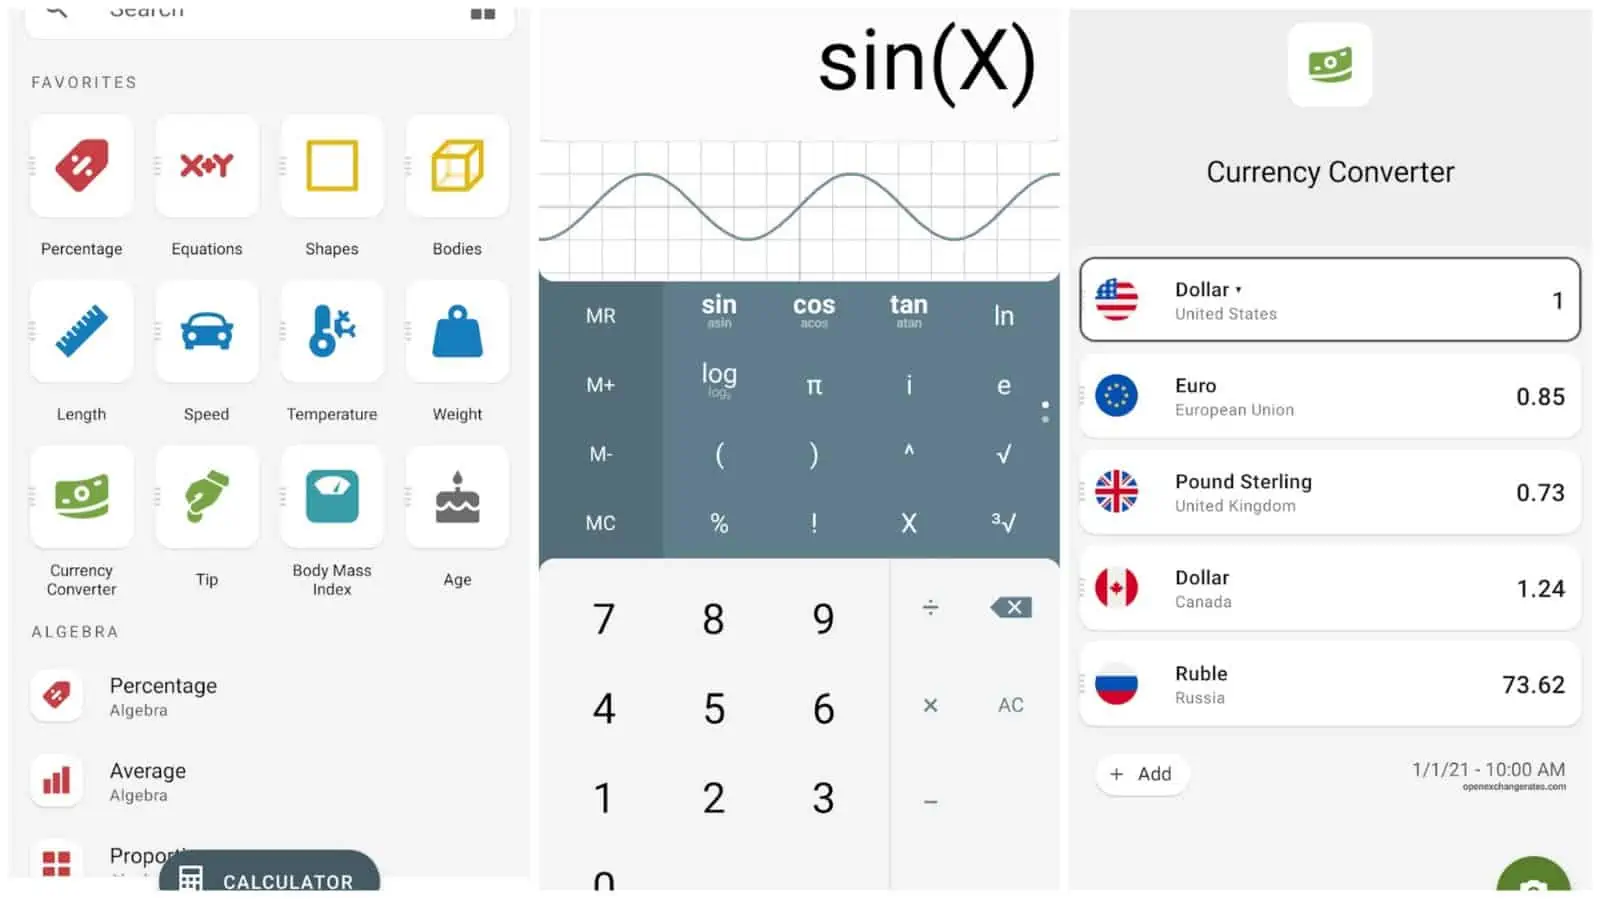 All In One Calculator app grid image 2022